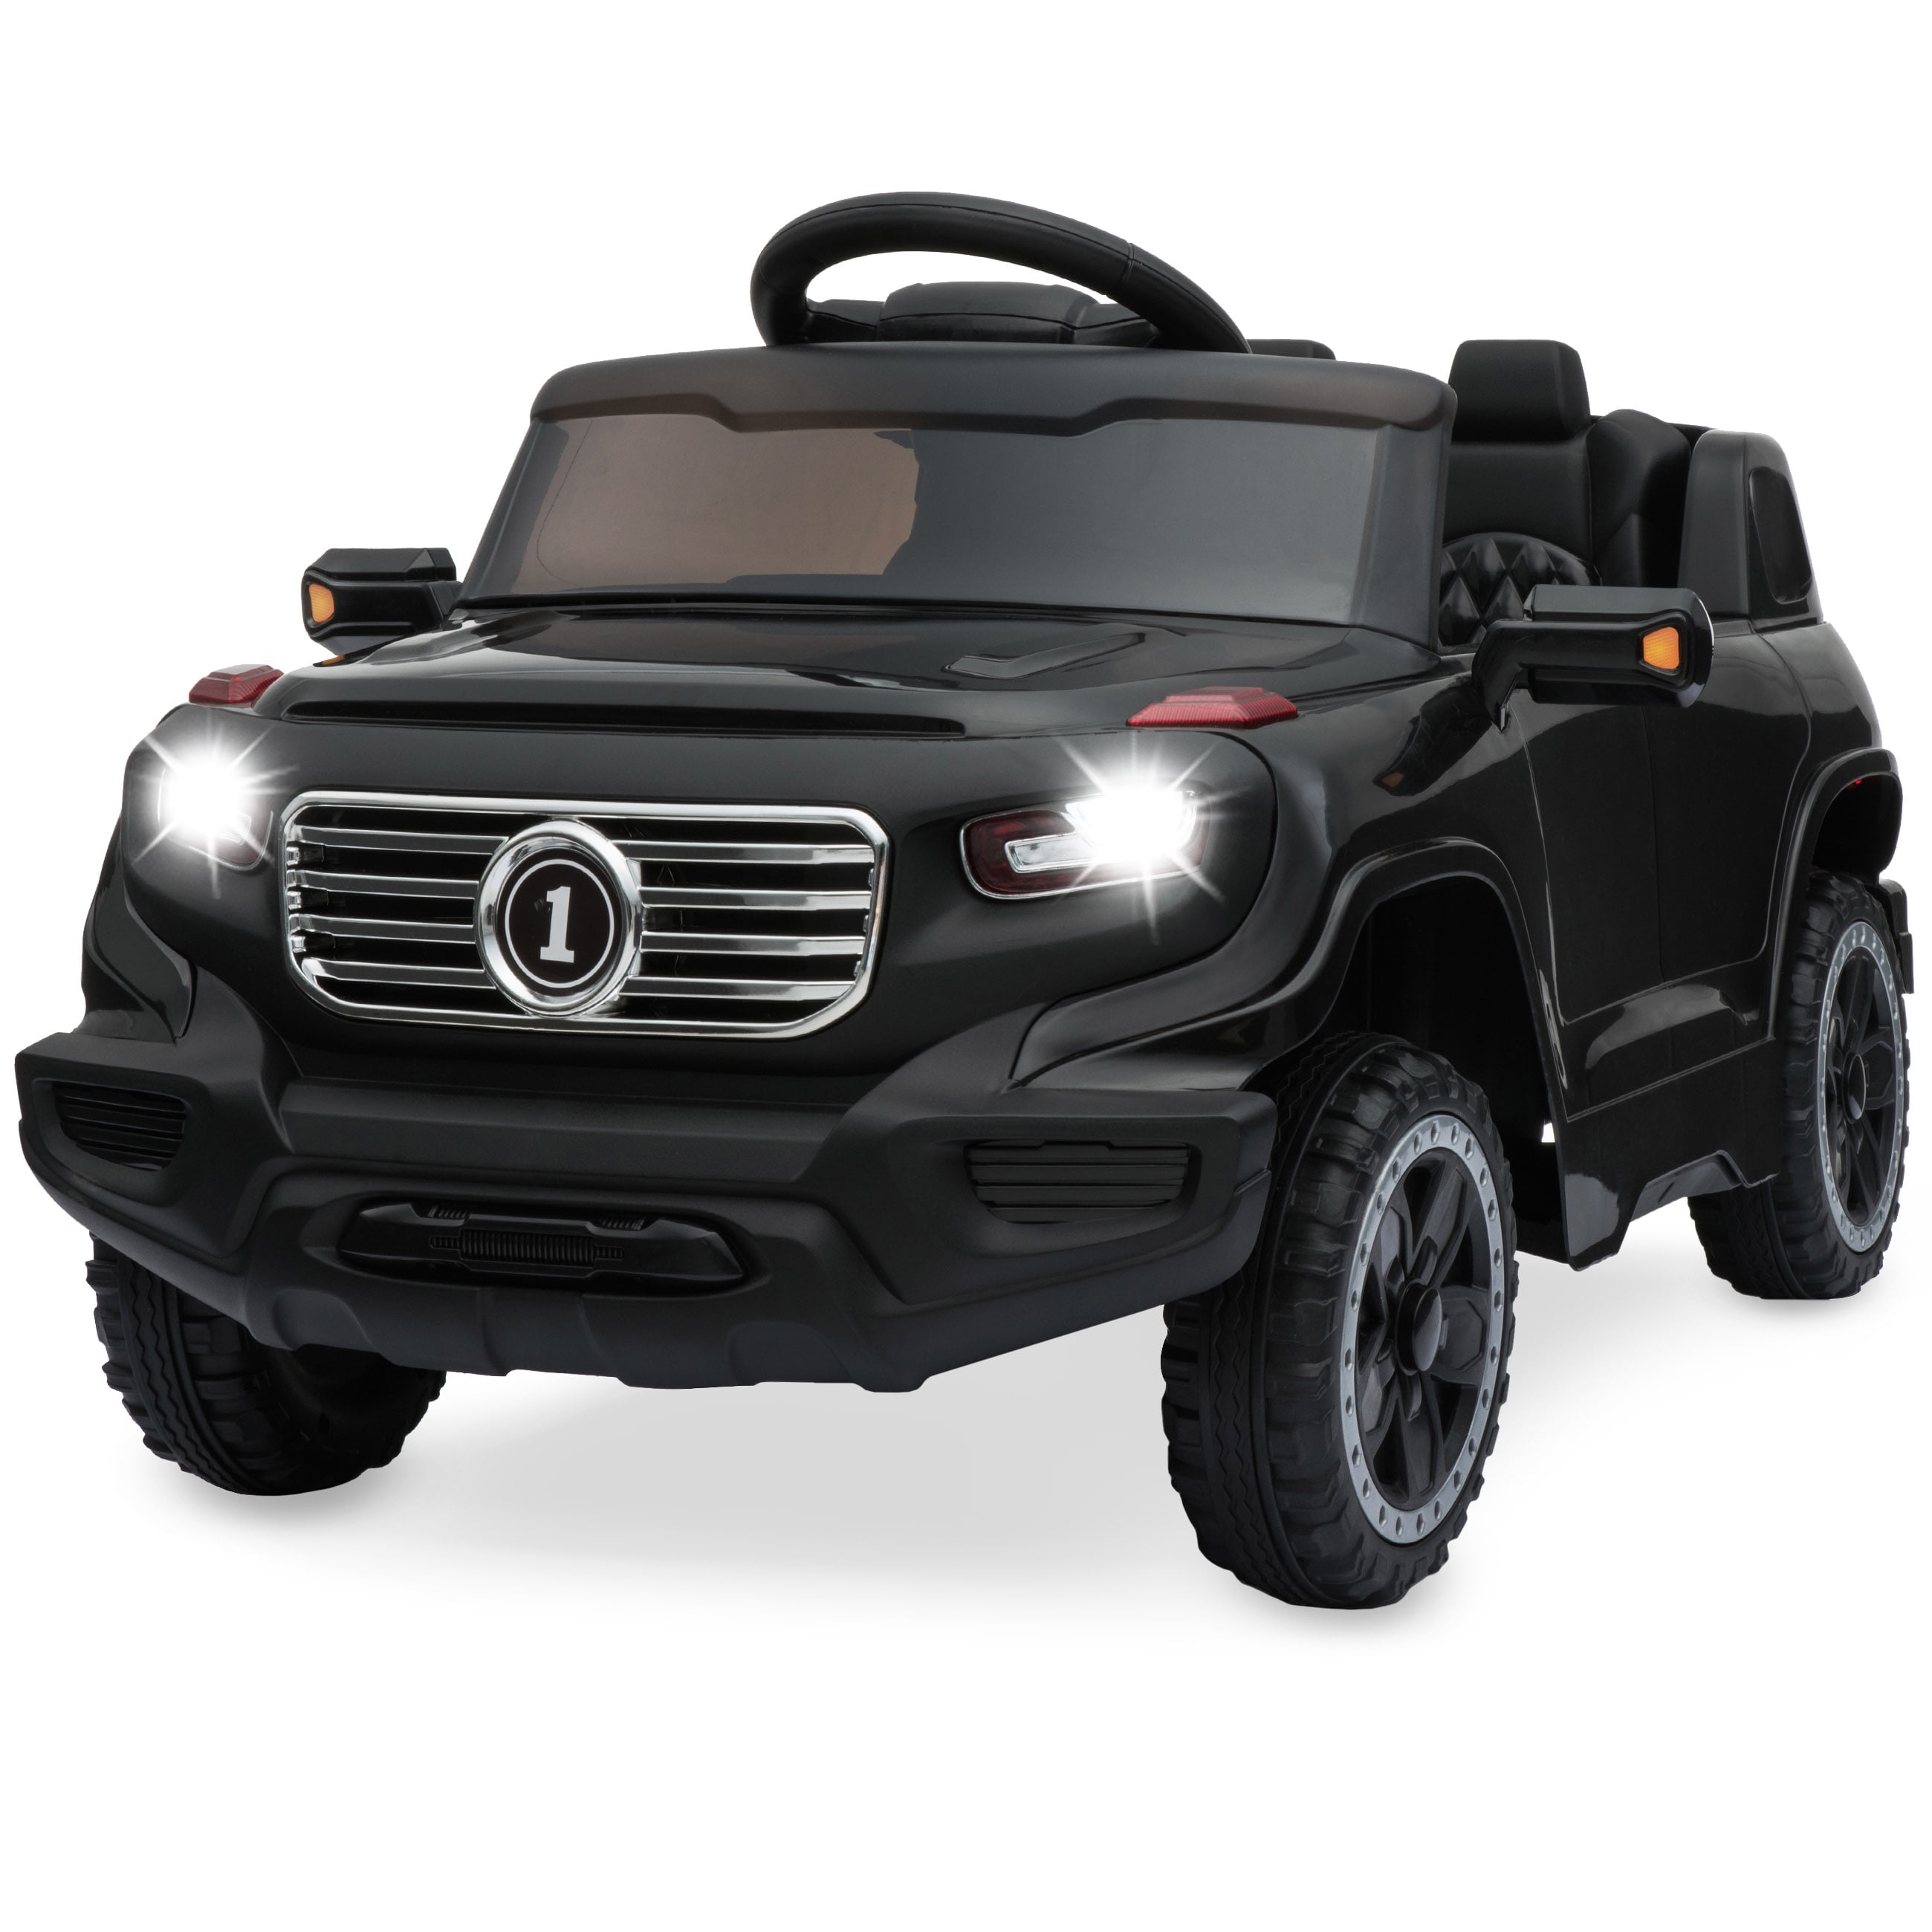 3 Speeds MP3 Player LED Headlights Black Best Choice Products 6V Kids Ride-On Car Truck w/ Parent Control Horn 